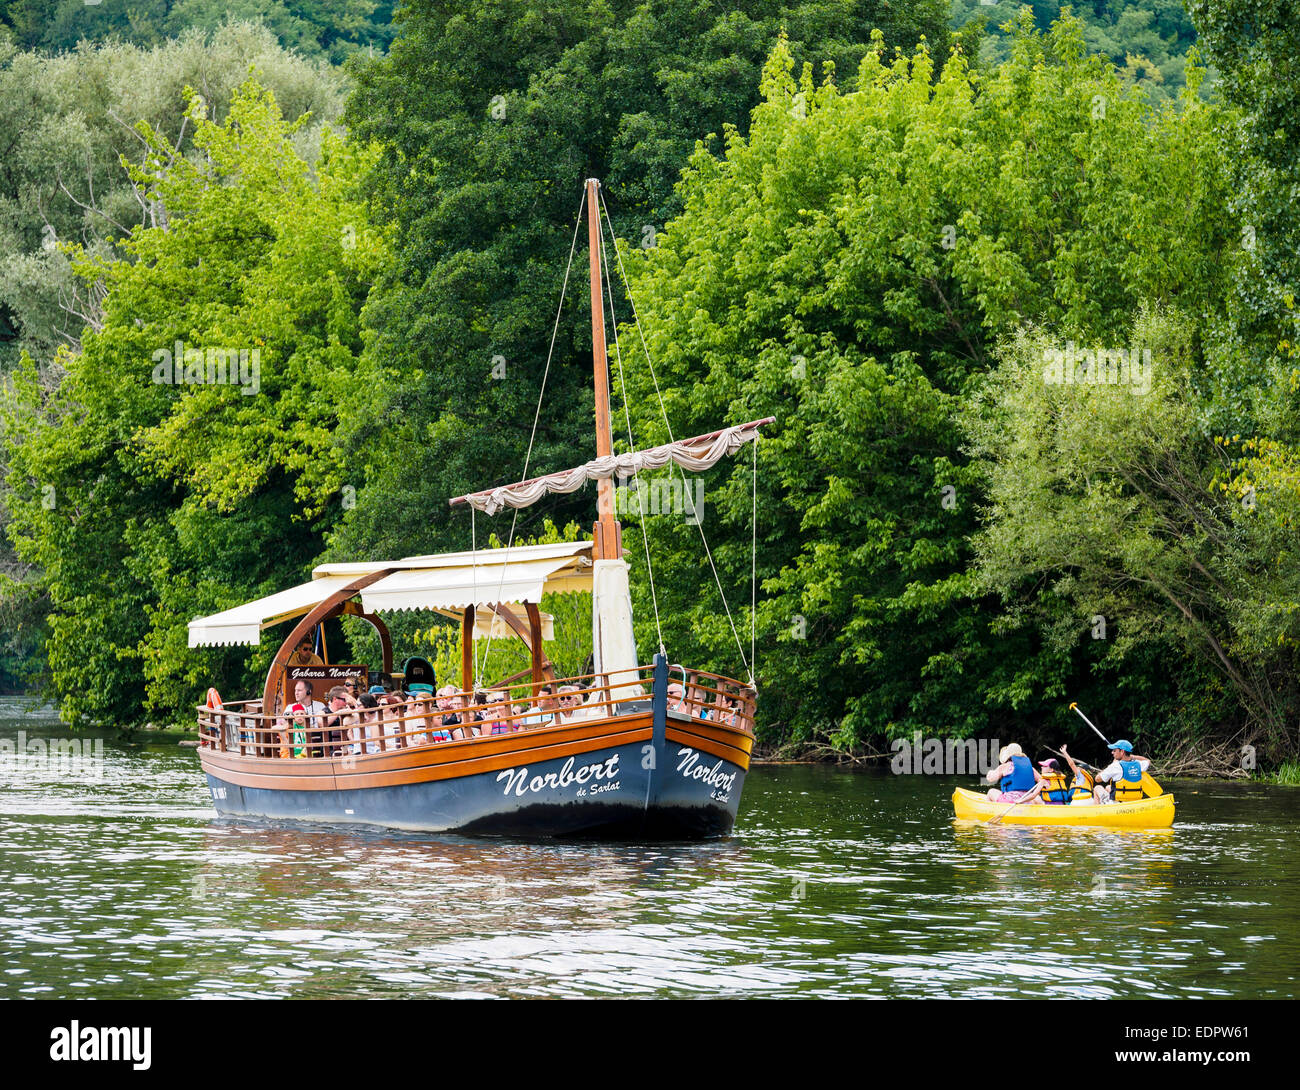 A tourist boat, in French called 'gabare', on the river Dordogne at La Roque-Gageac. Stock Photo